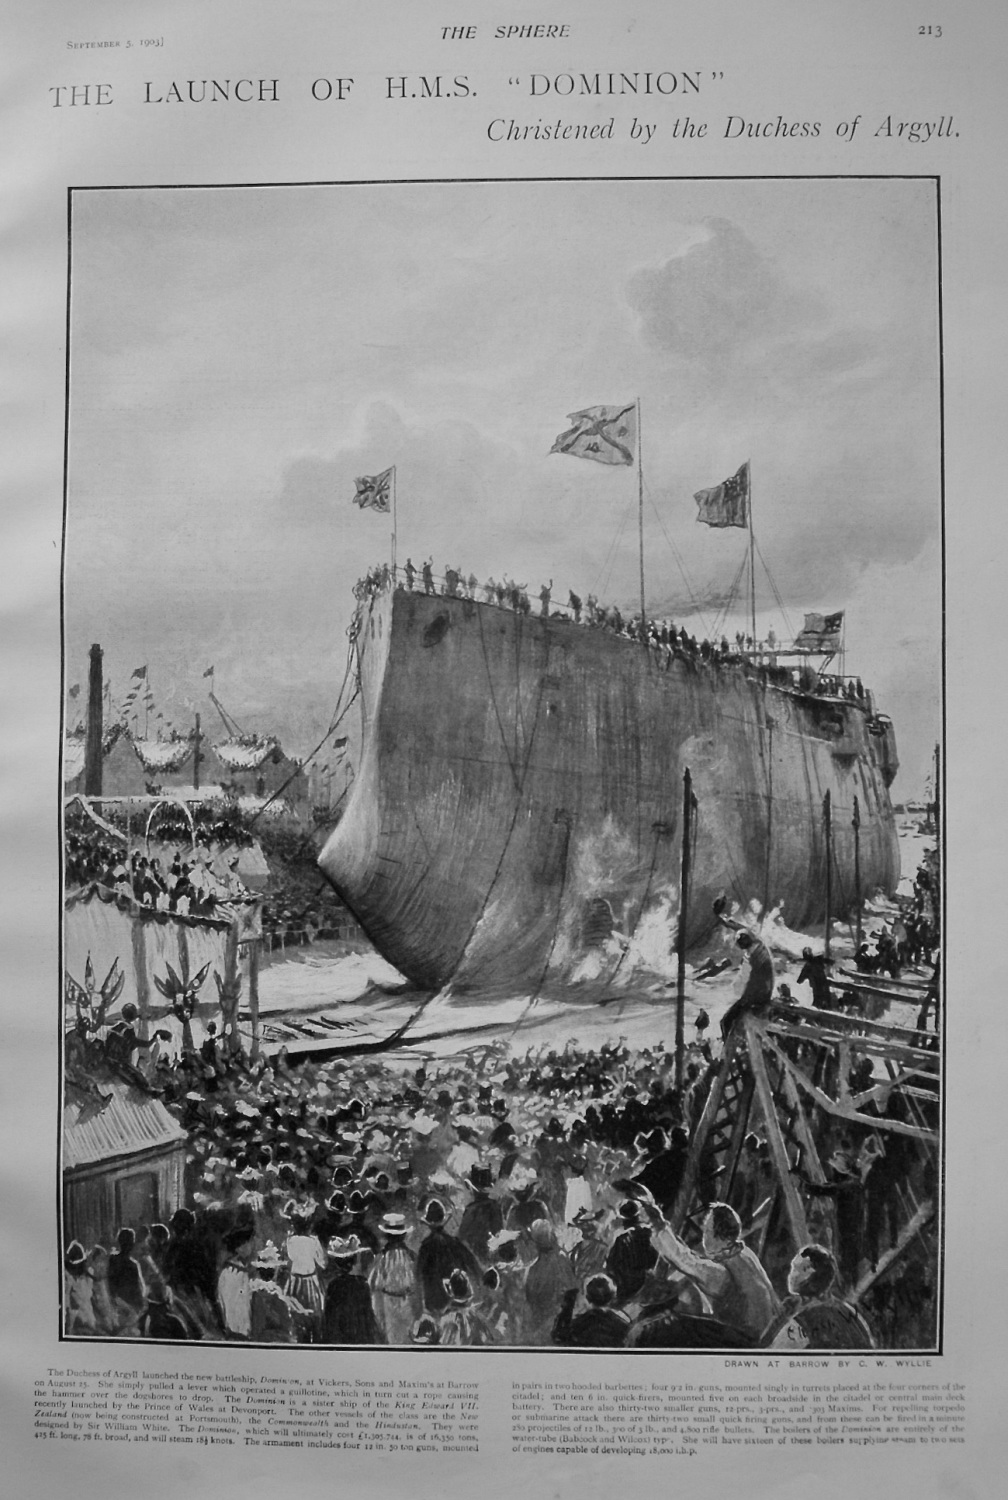 The Launch of H.M.S. 